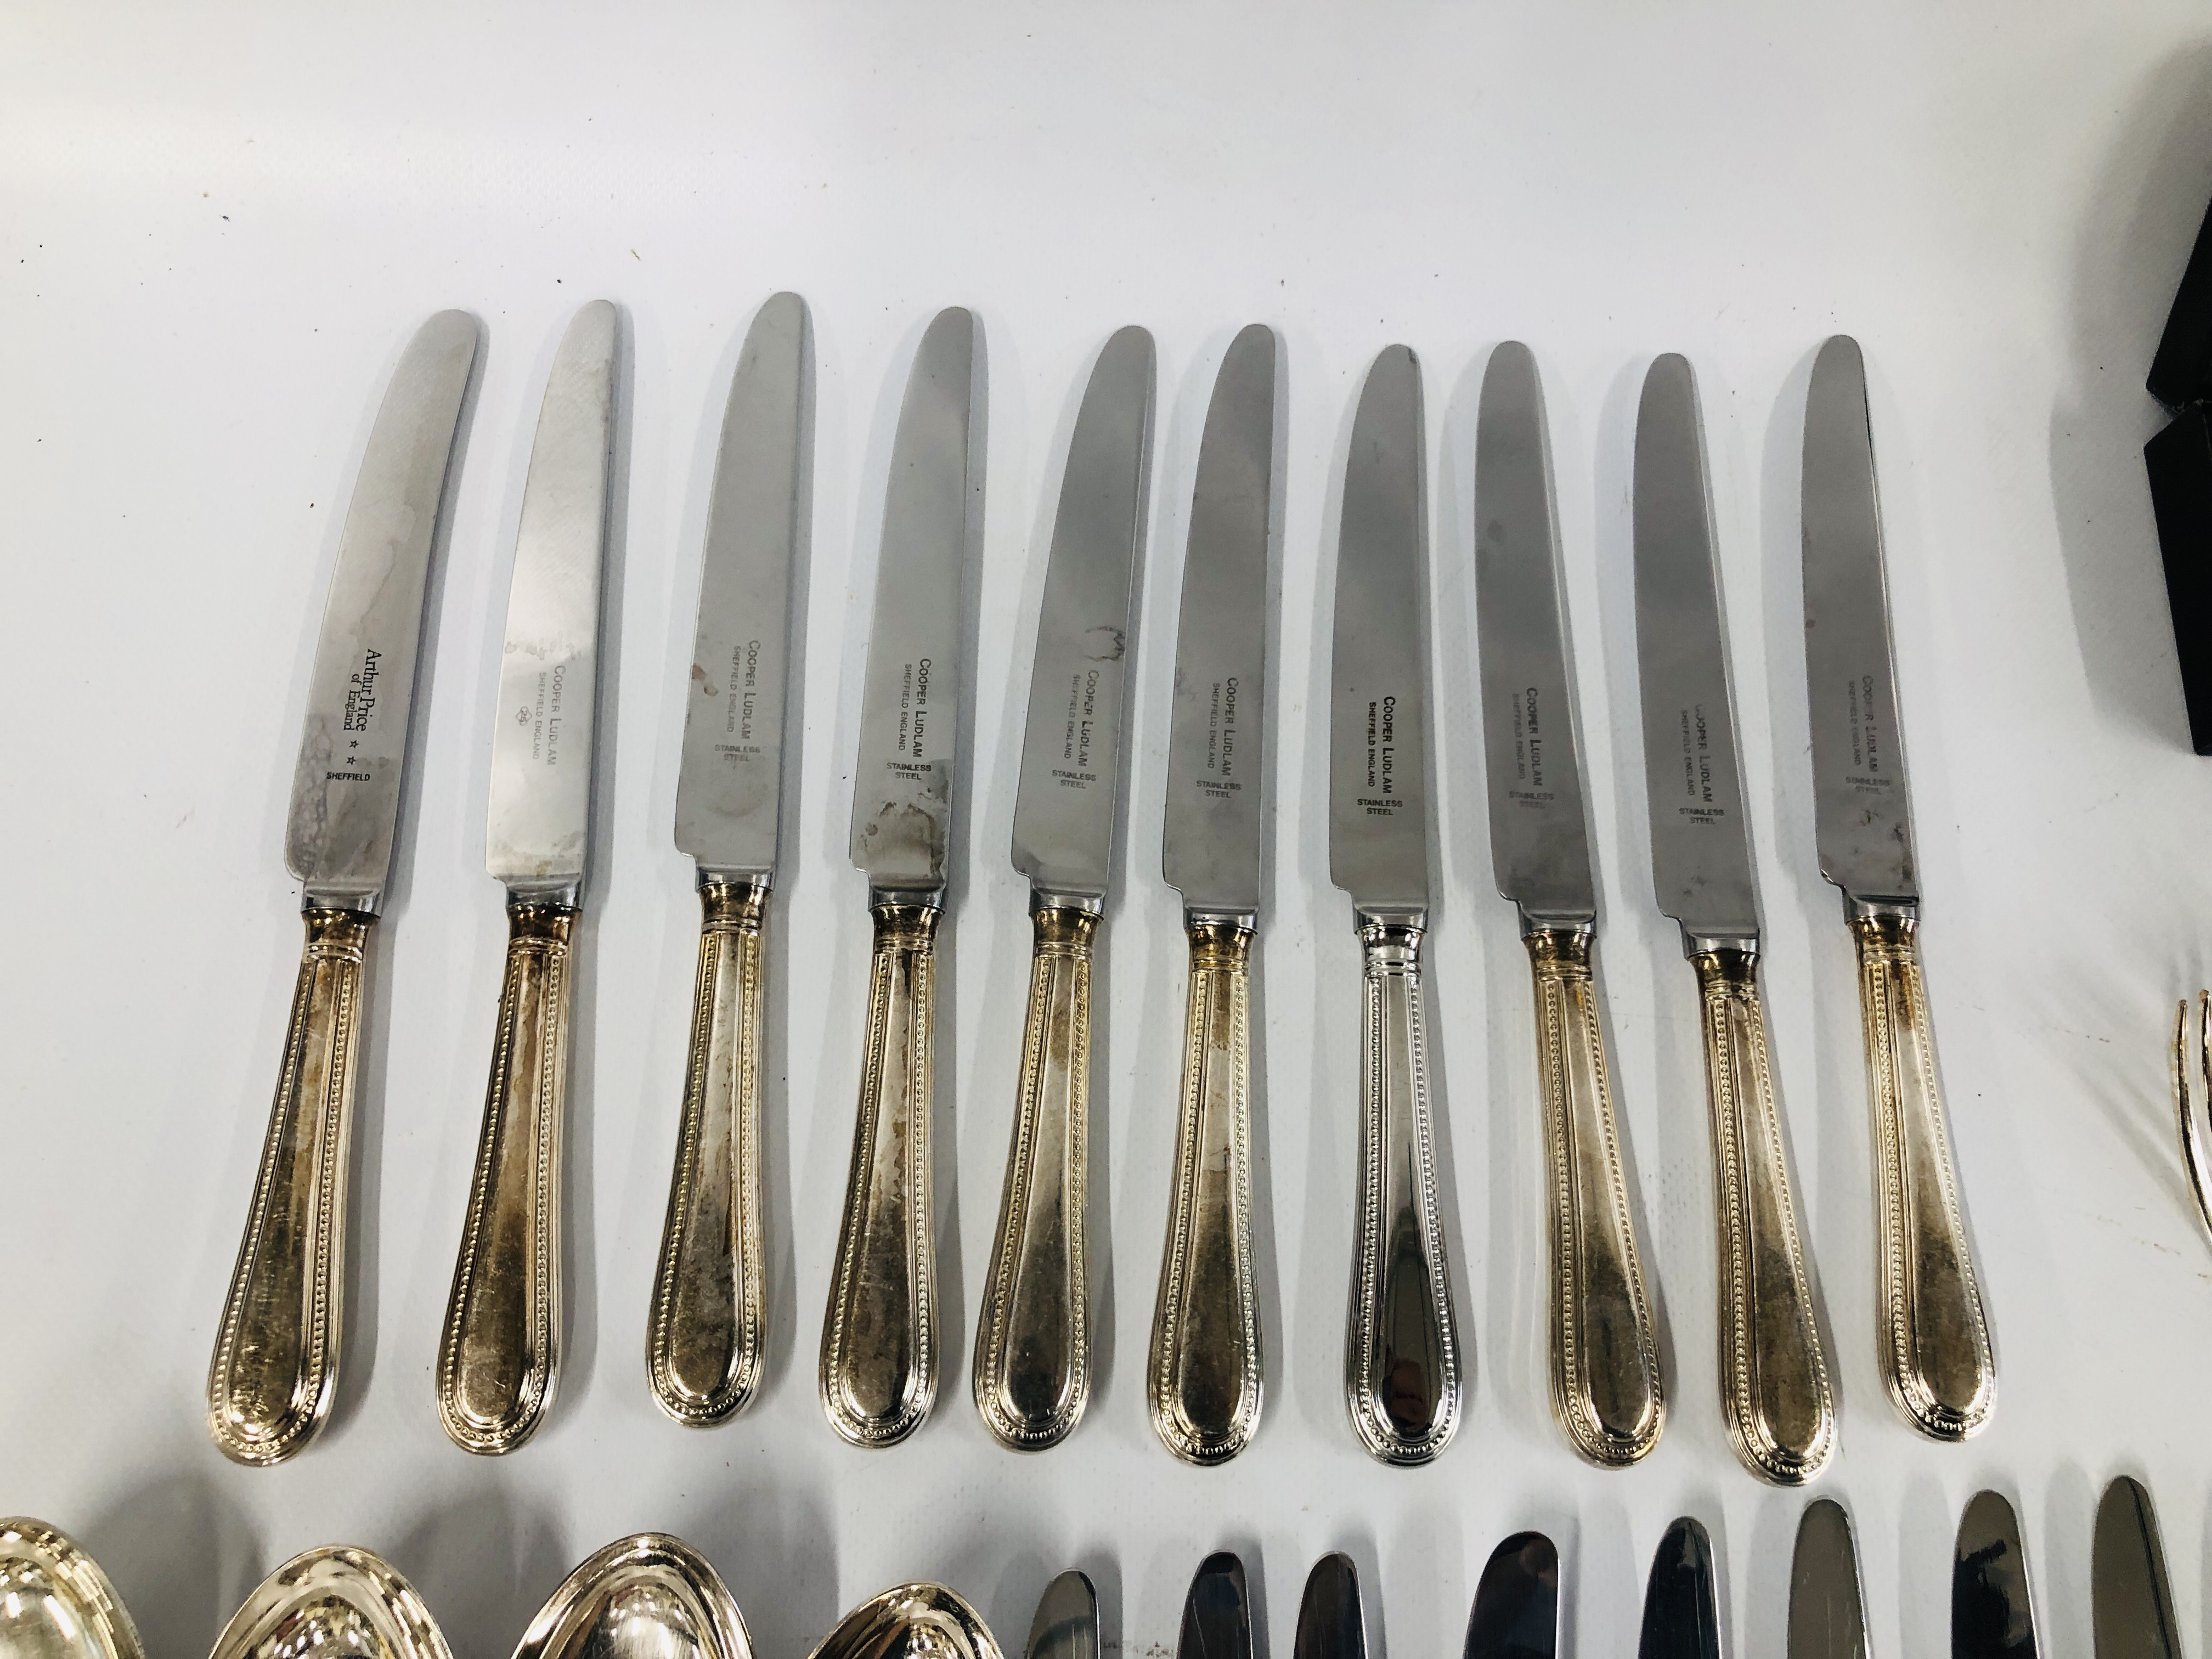 87 PIECES OF SHEFFIELD CUTLERY KNIVES MARKED COOPER LUDLAM. - Image 5 of 10